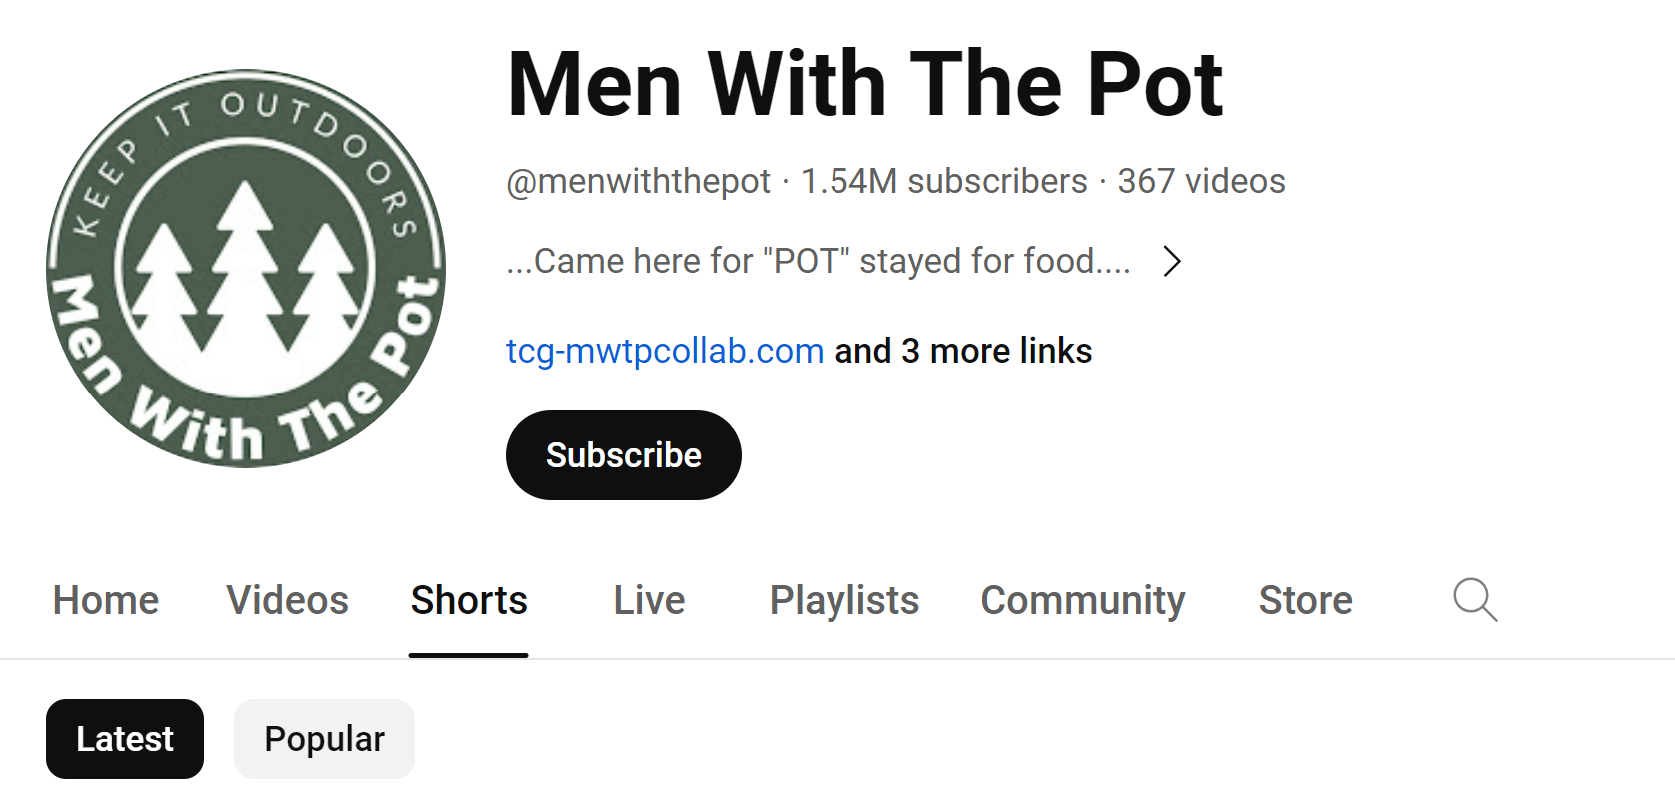 YouTube page 'Men with the Pot'